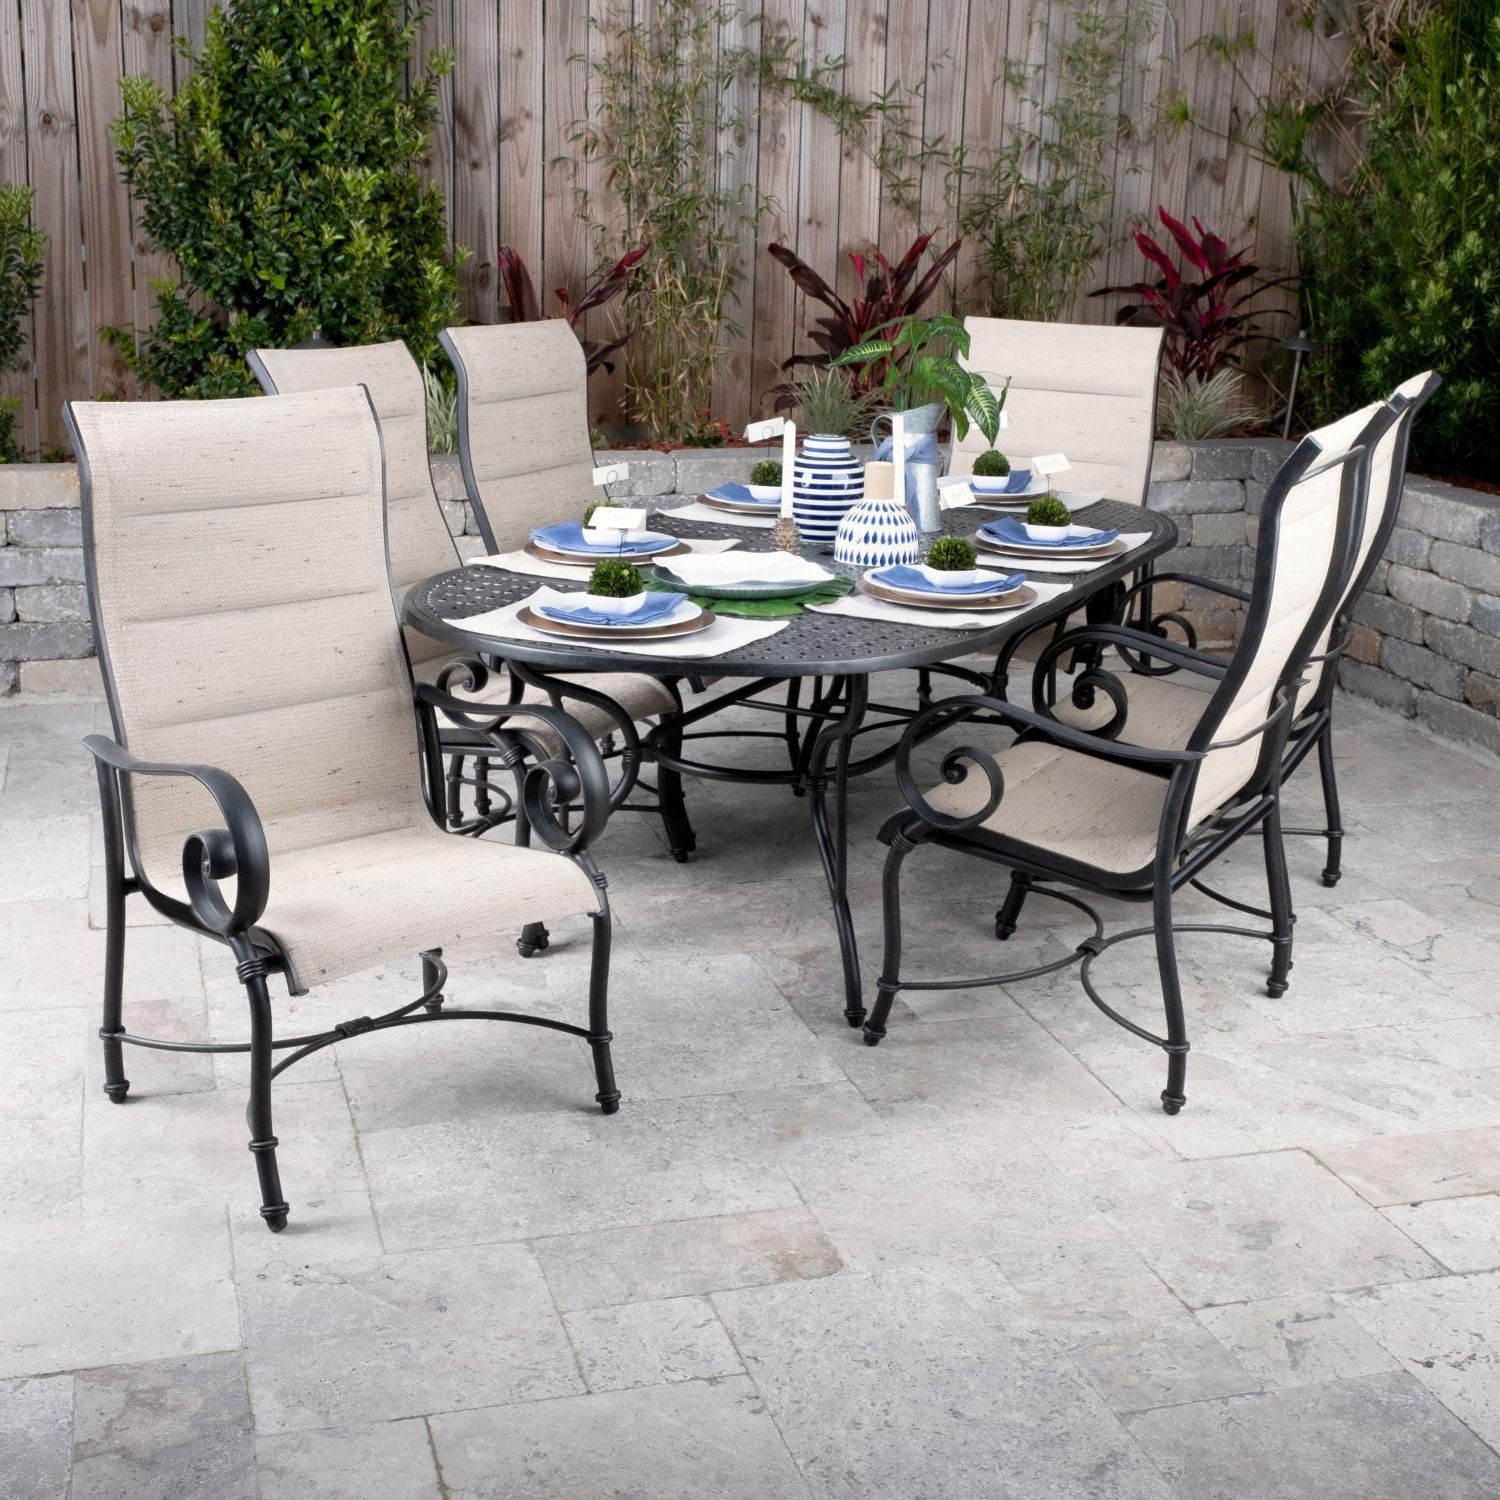 Elysian 7 Piece Padded Sunbrella Sling Patio Dining Set W/ 84 X 42 Inch Pertaining To Most Up To Date Oval 7 Piece Outdoor Patio Dining Sets (View 13 of 15)